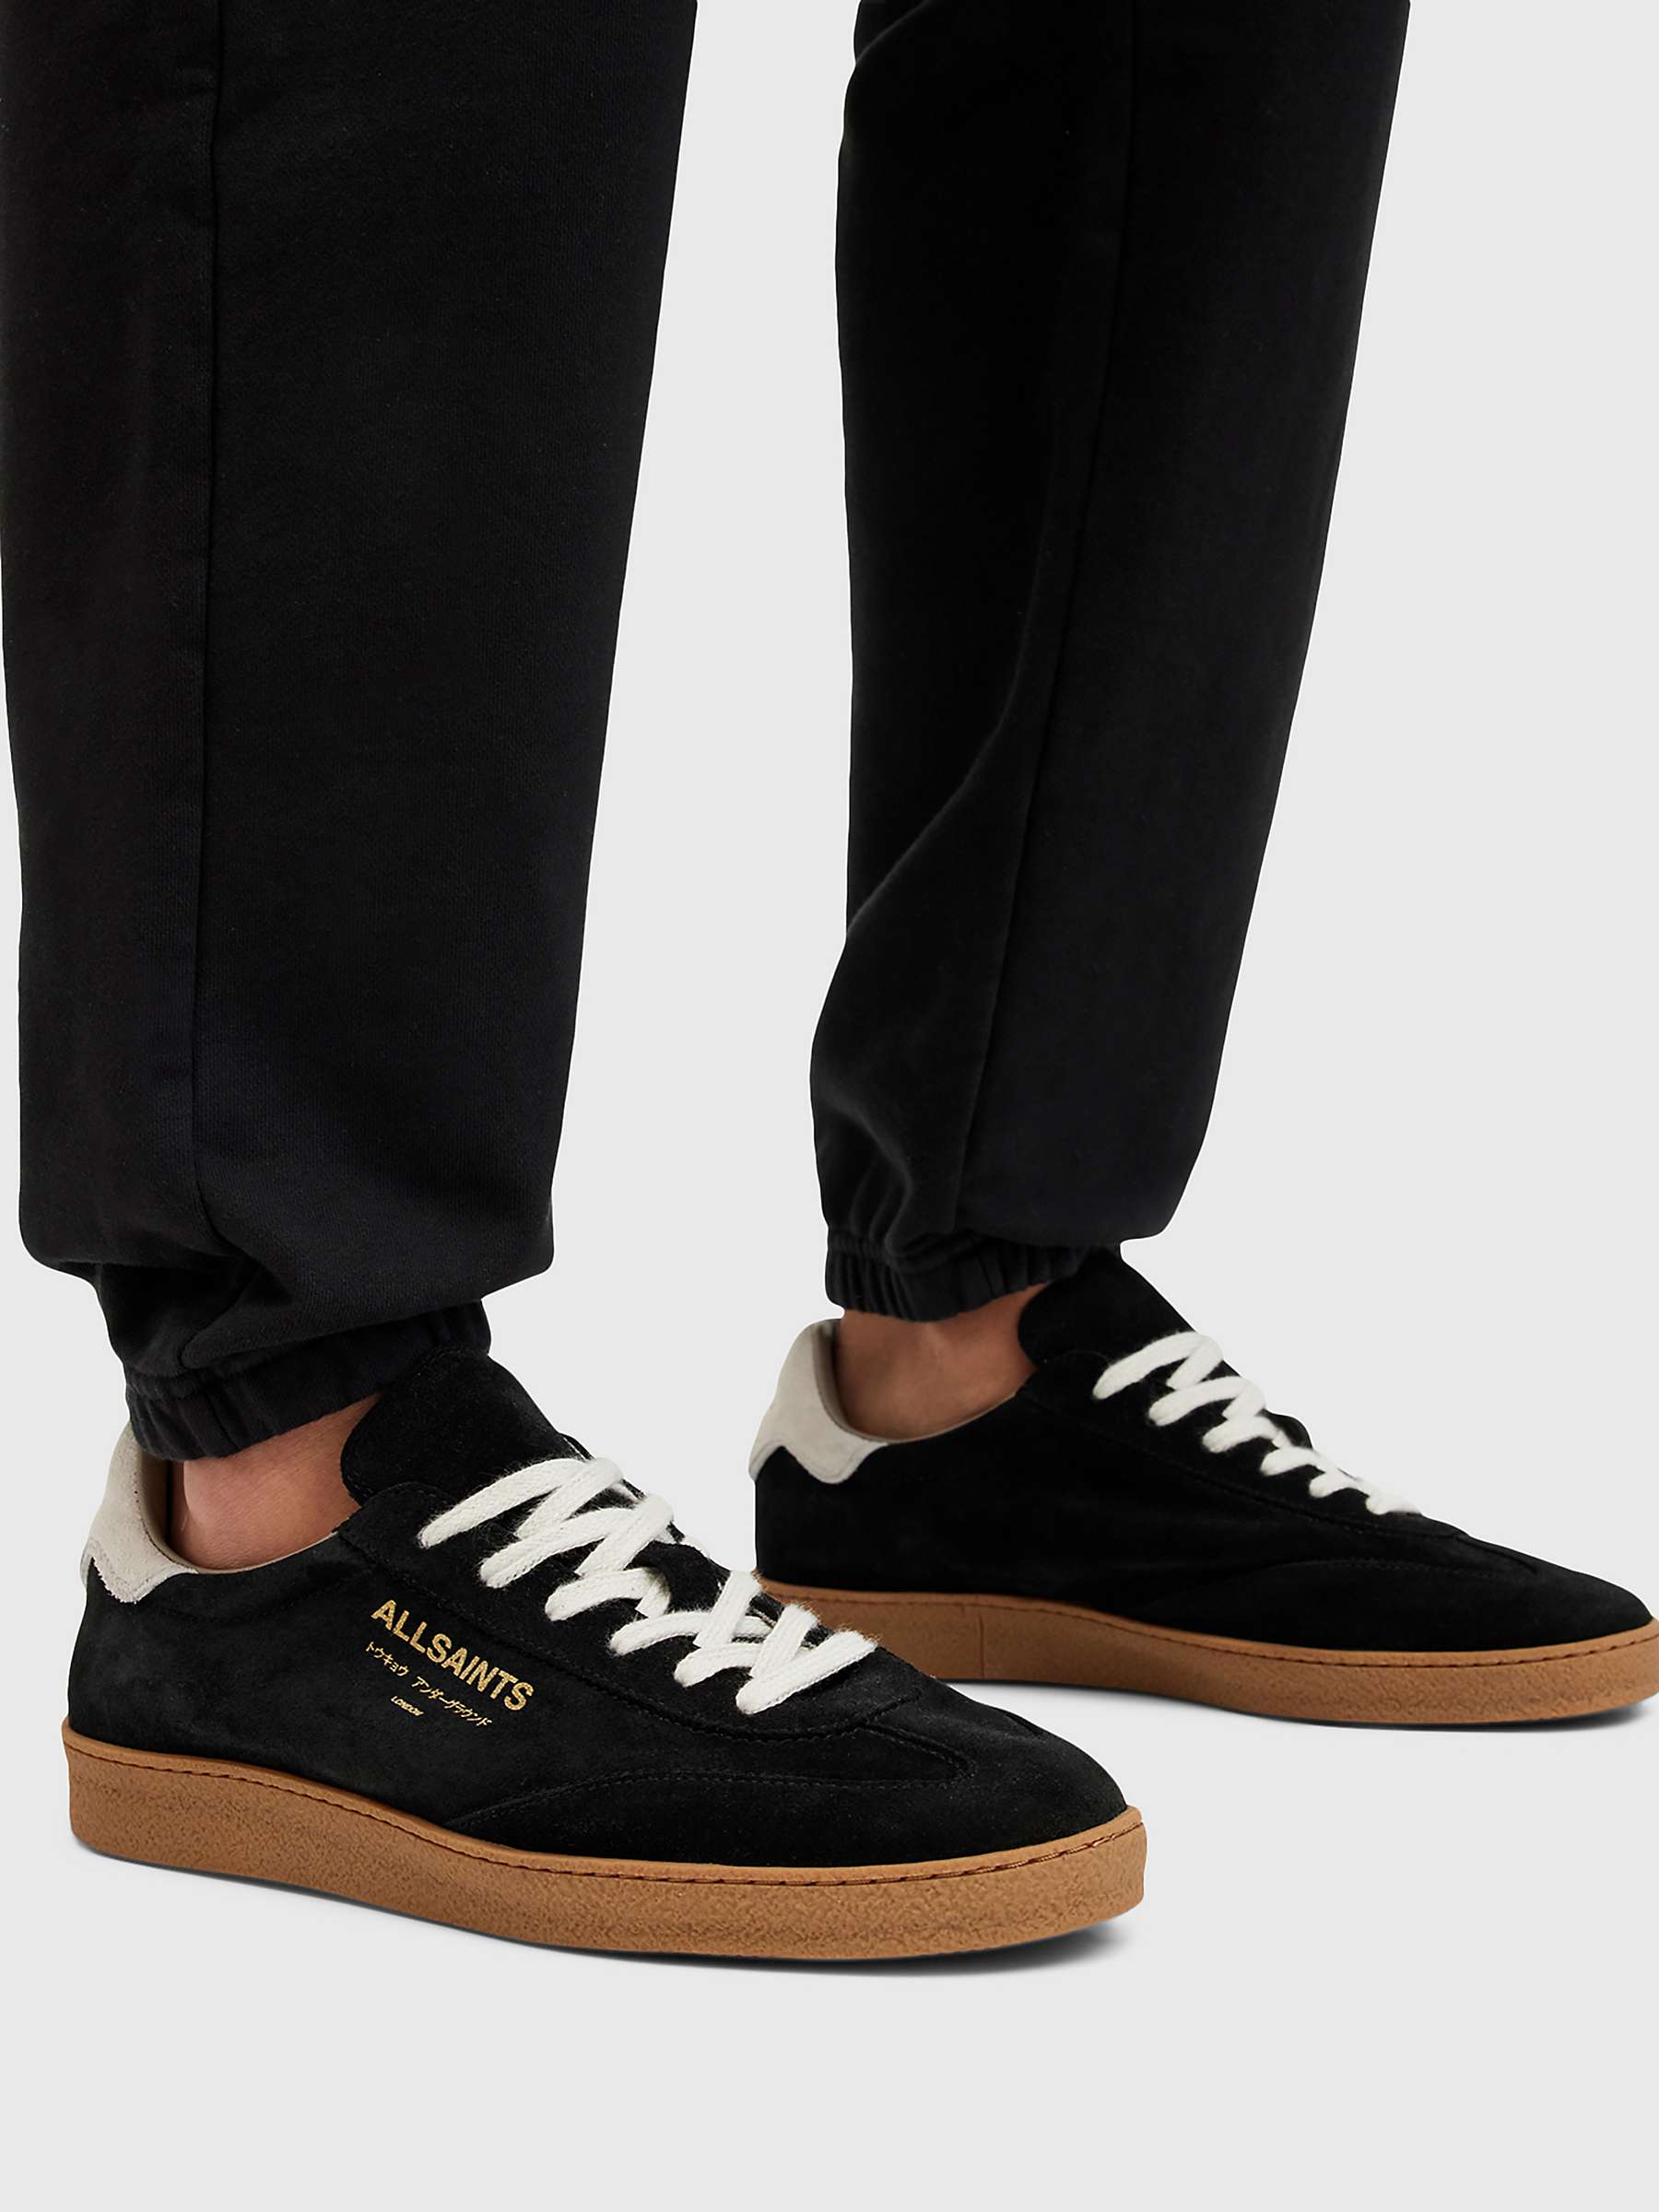 Buy AllSaints Thelma Suede Trainers, Black/White Online at johnlewis.com